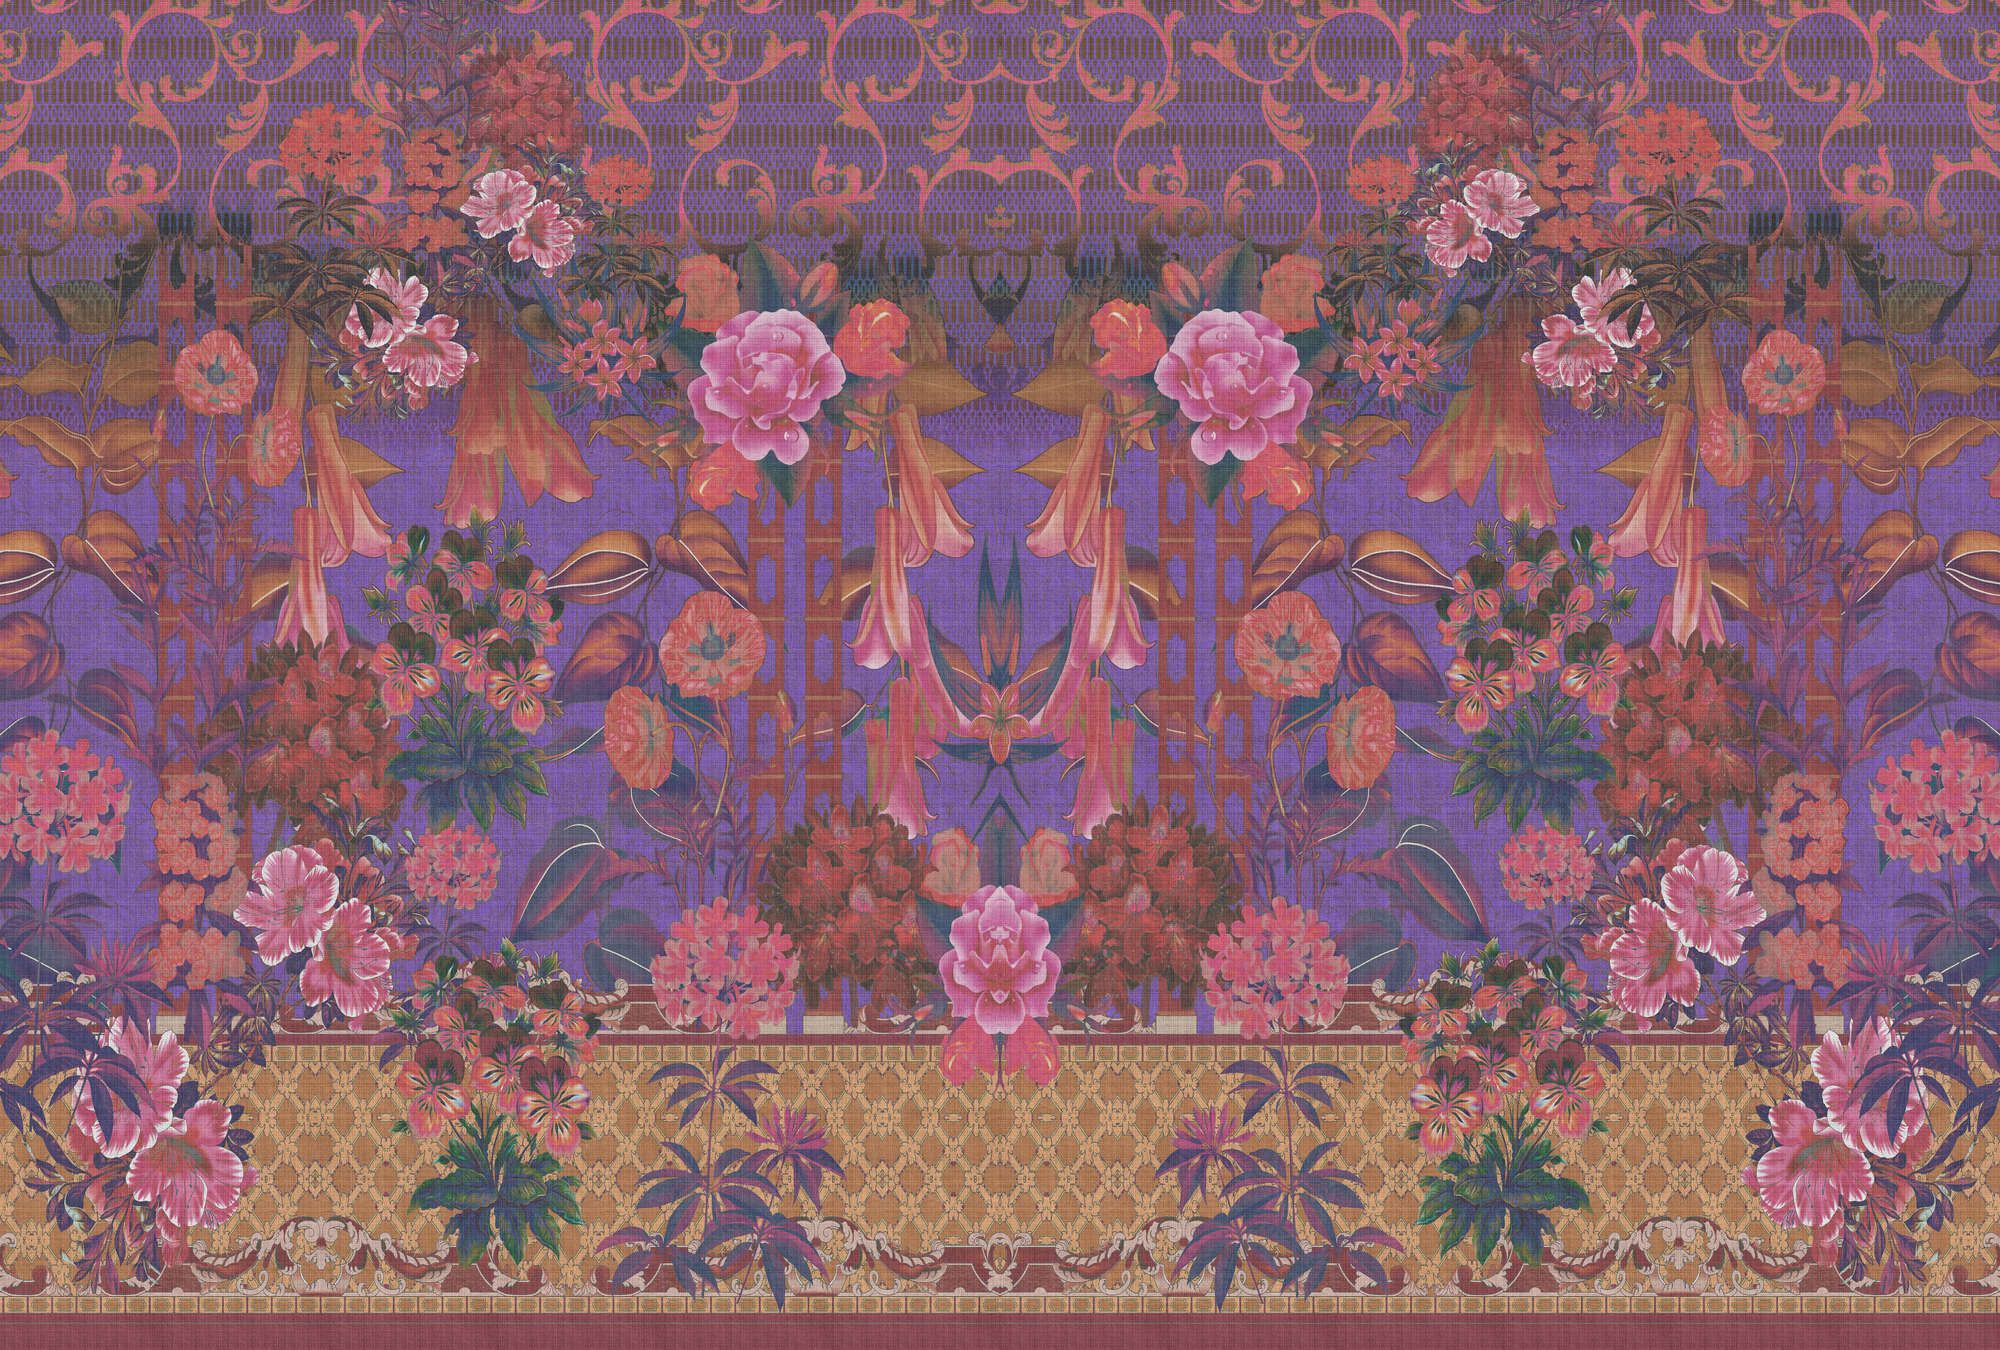             Photo wallpaper »sati 1« - Floral design with linen structure look - Purple | Smooth, slightly shiny premium non-woven fabric
        